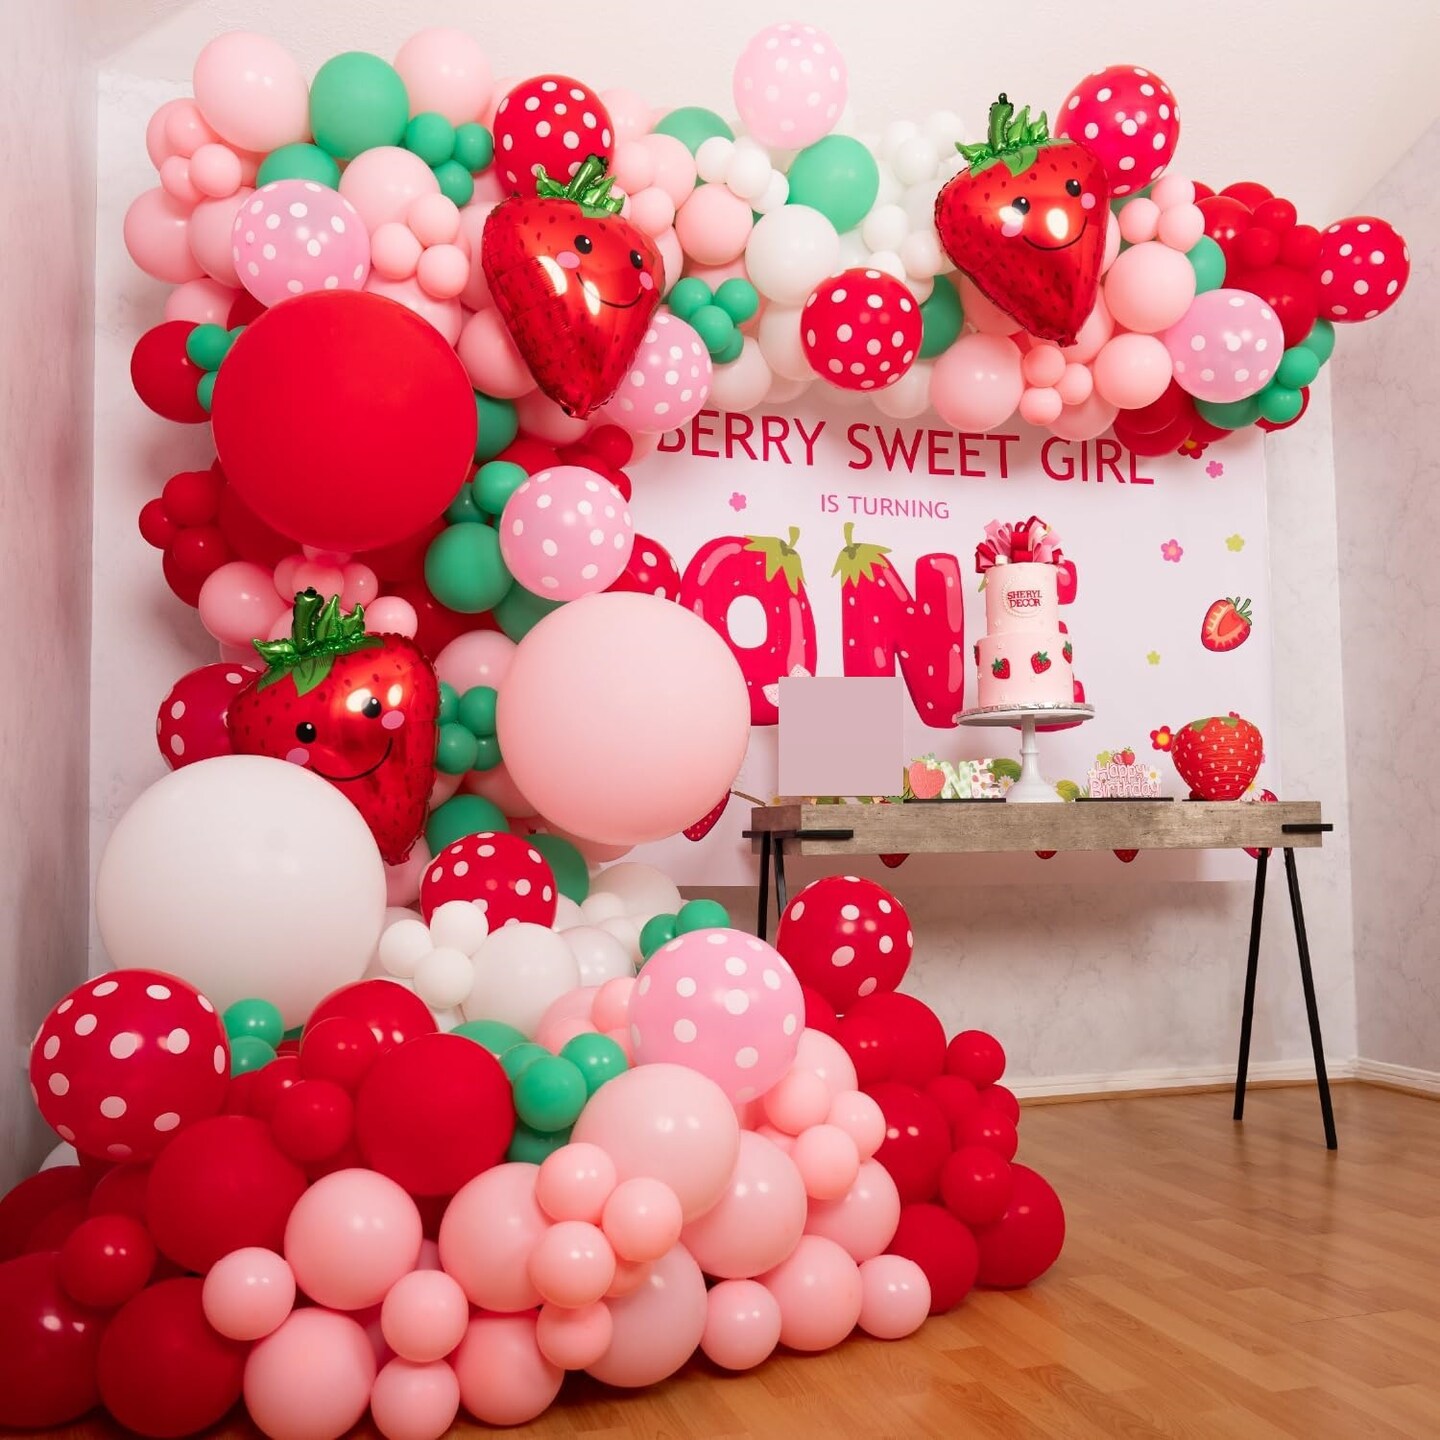 ALL-IN-1 Strawberry Balloon Arch Kit &#x26; Garland with BONUS Strawberry &#x2013; Small and Large Red Pink Green Strawberry Balloons &#x2013; Strawberry Shortcake Party Decorations Supplies for Birthday &#x26; Baby Shower